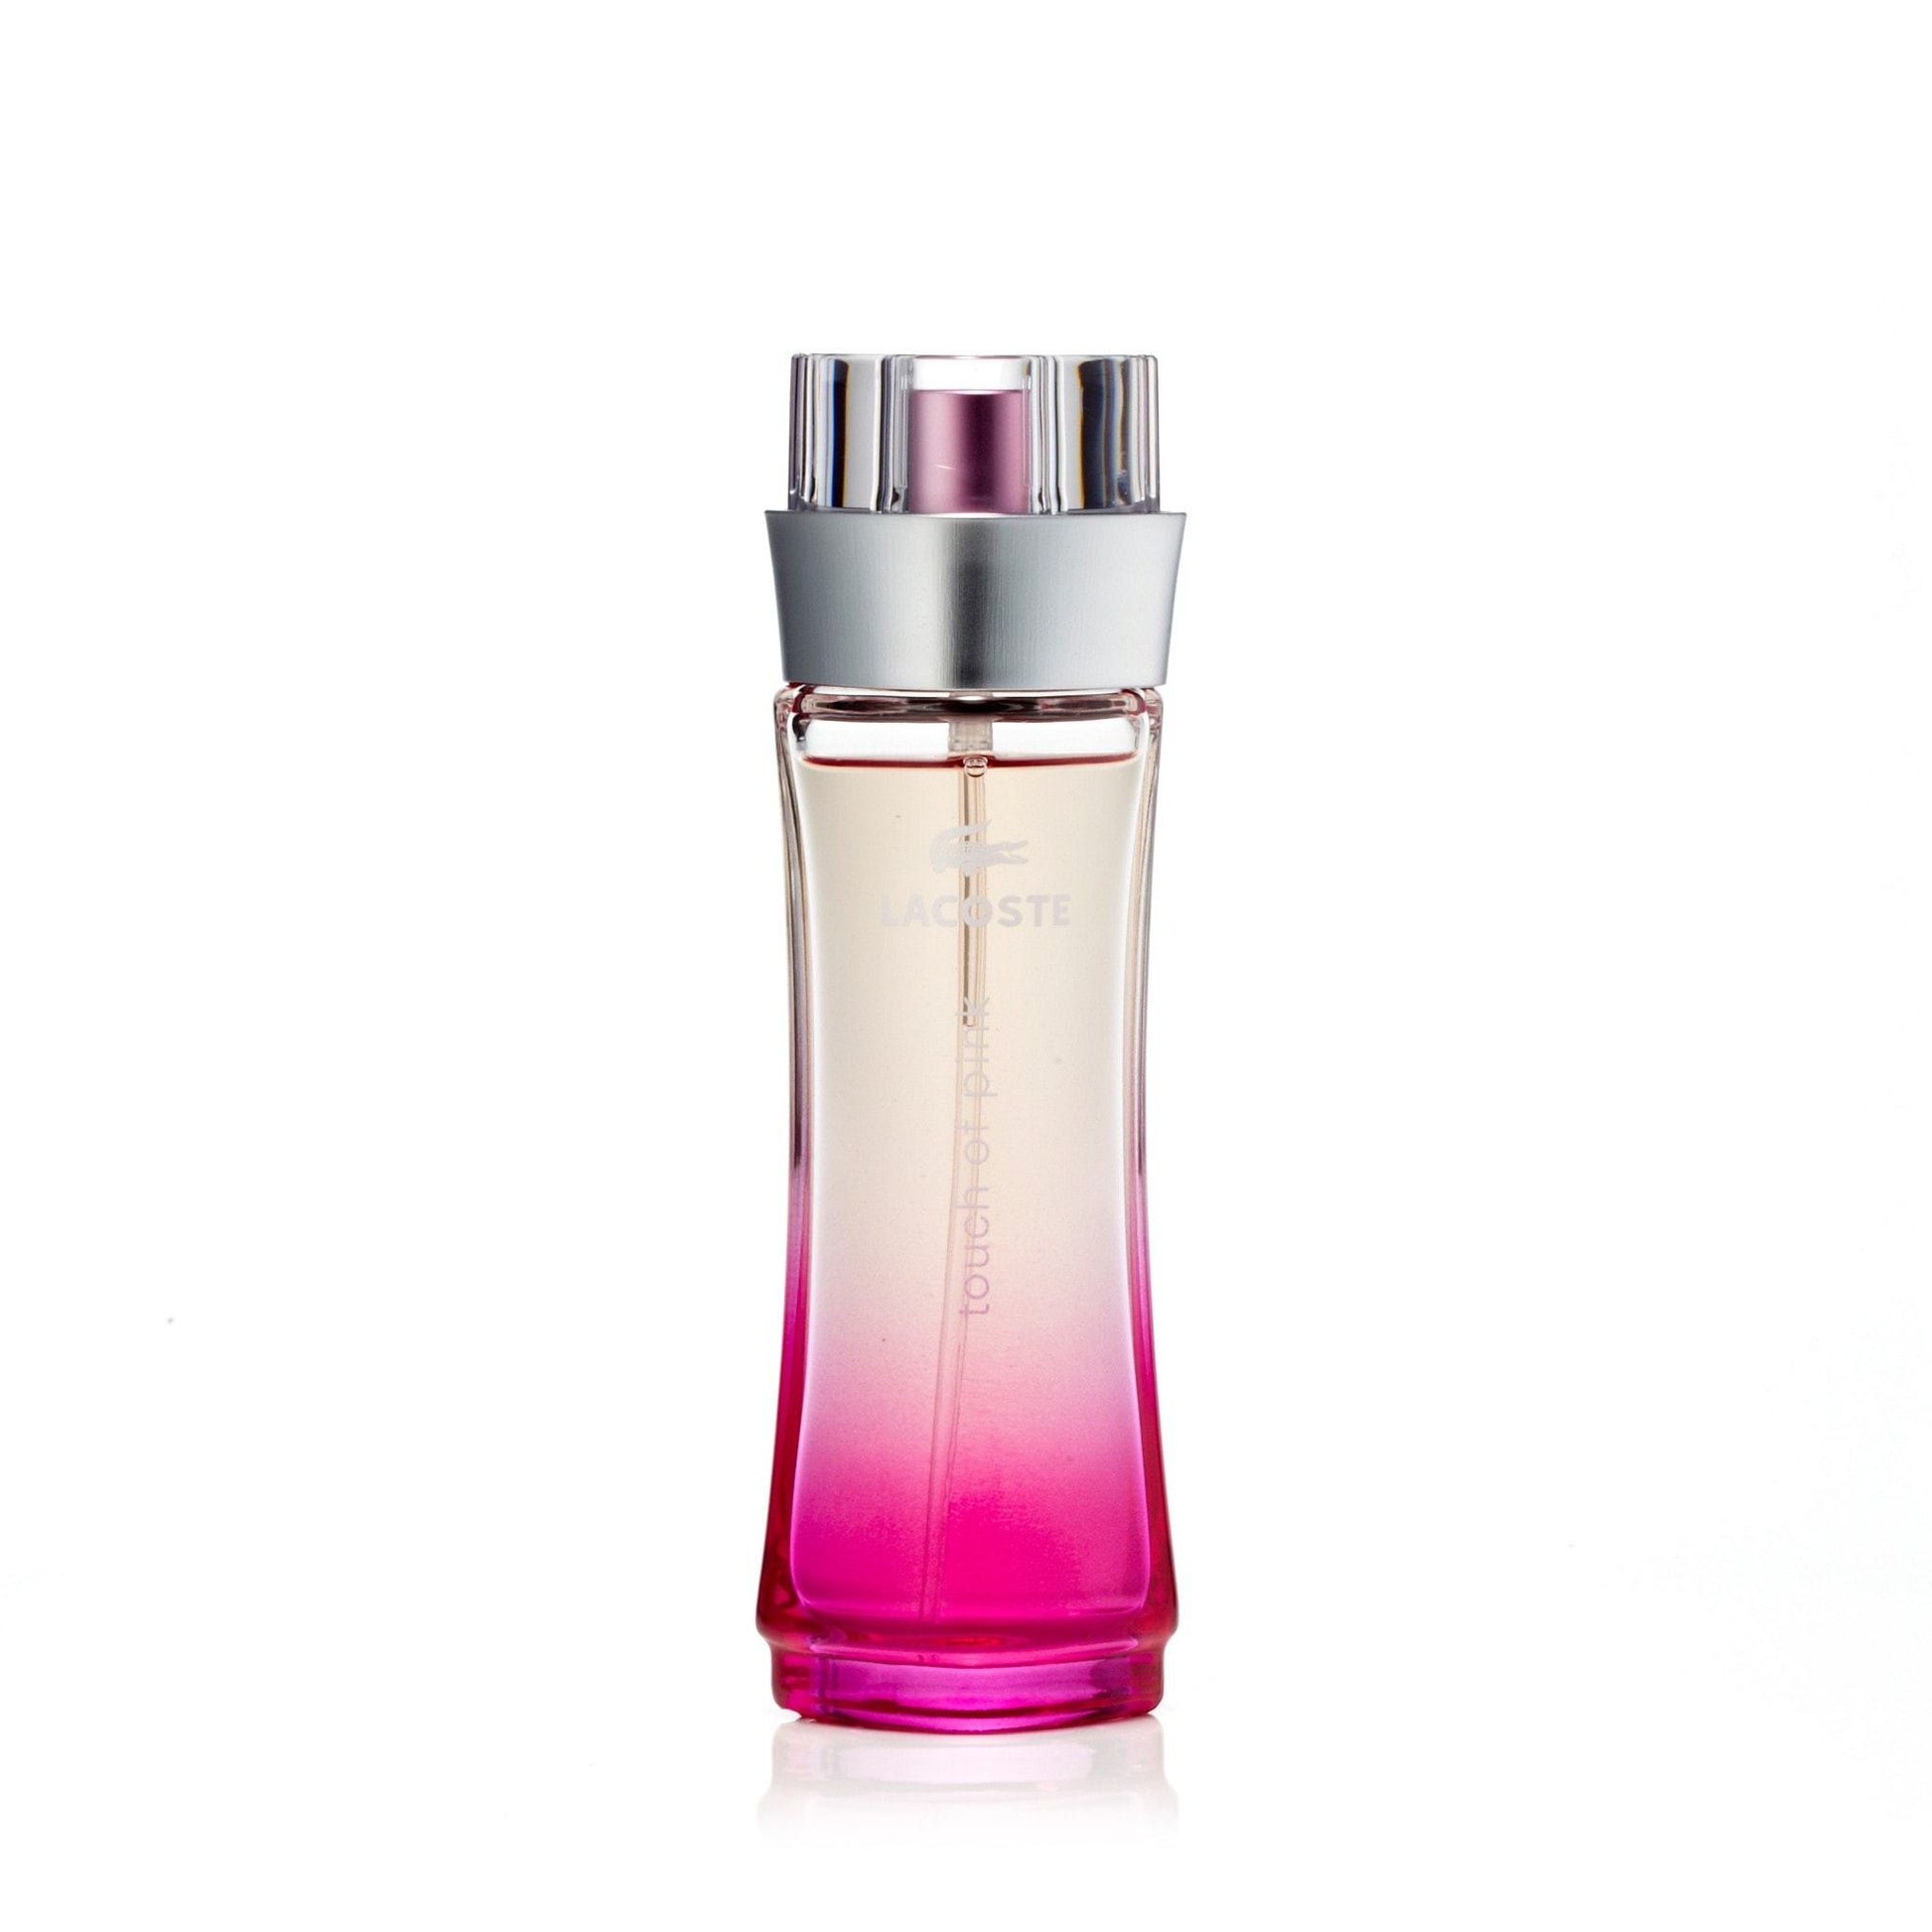 Touch of Pink Eau de Toilette Spray for Women by Lacoste, Product image 3